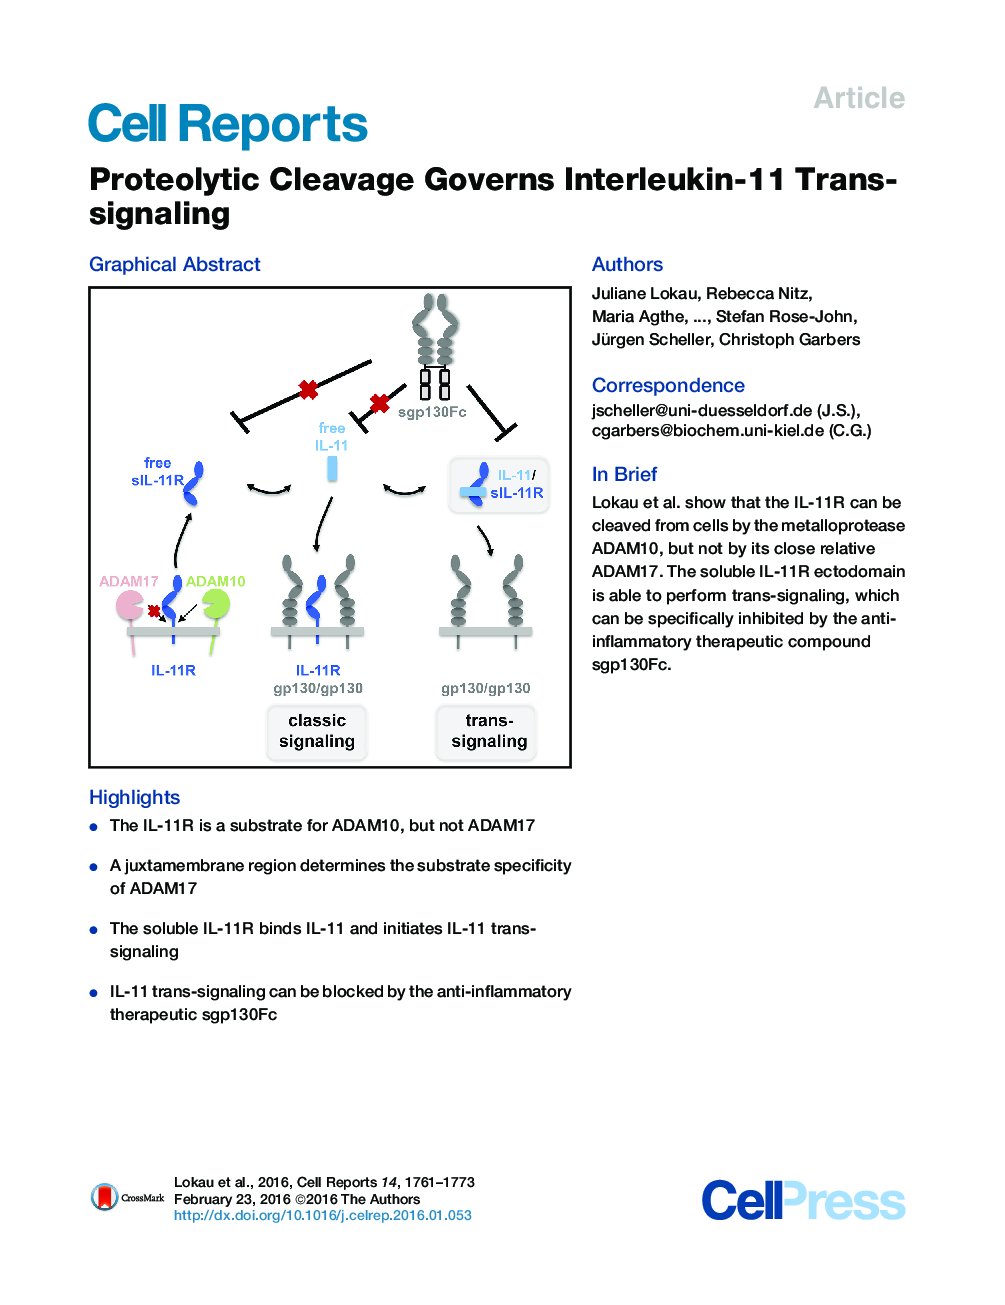 Proteolytic Cleavage Governs Interleukin-11 Trans-signaling 